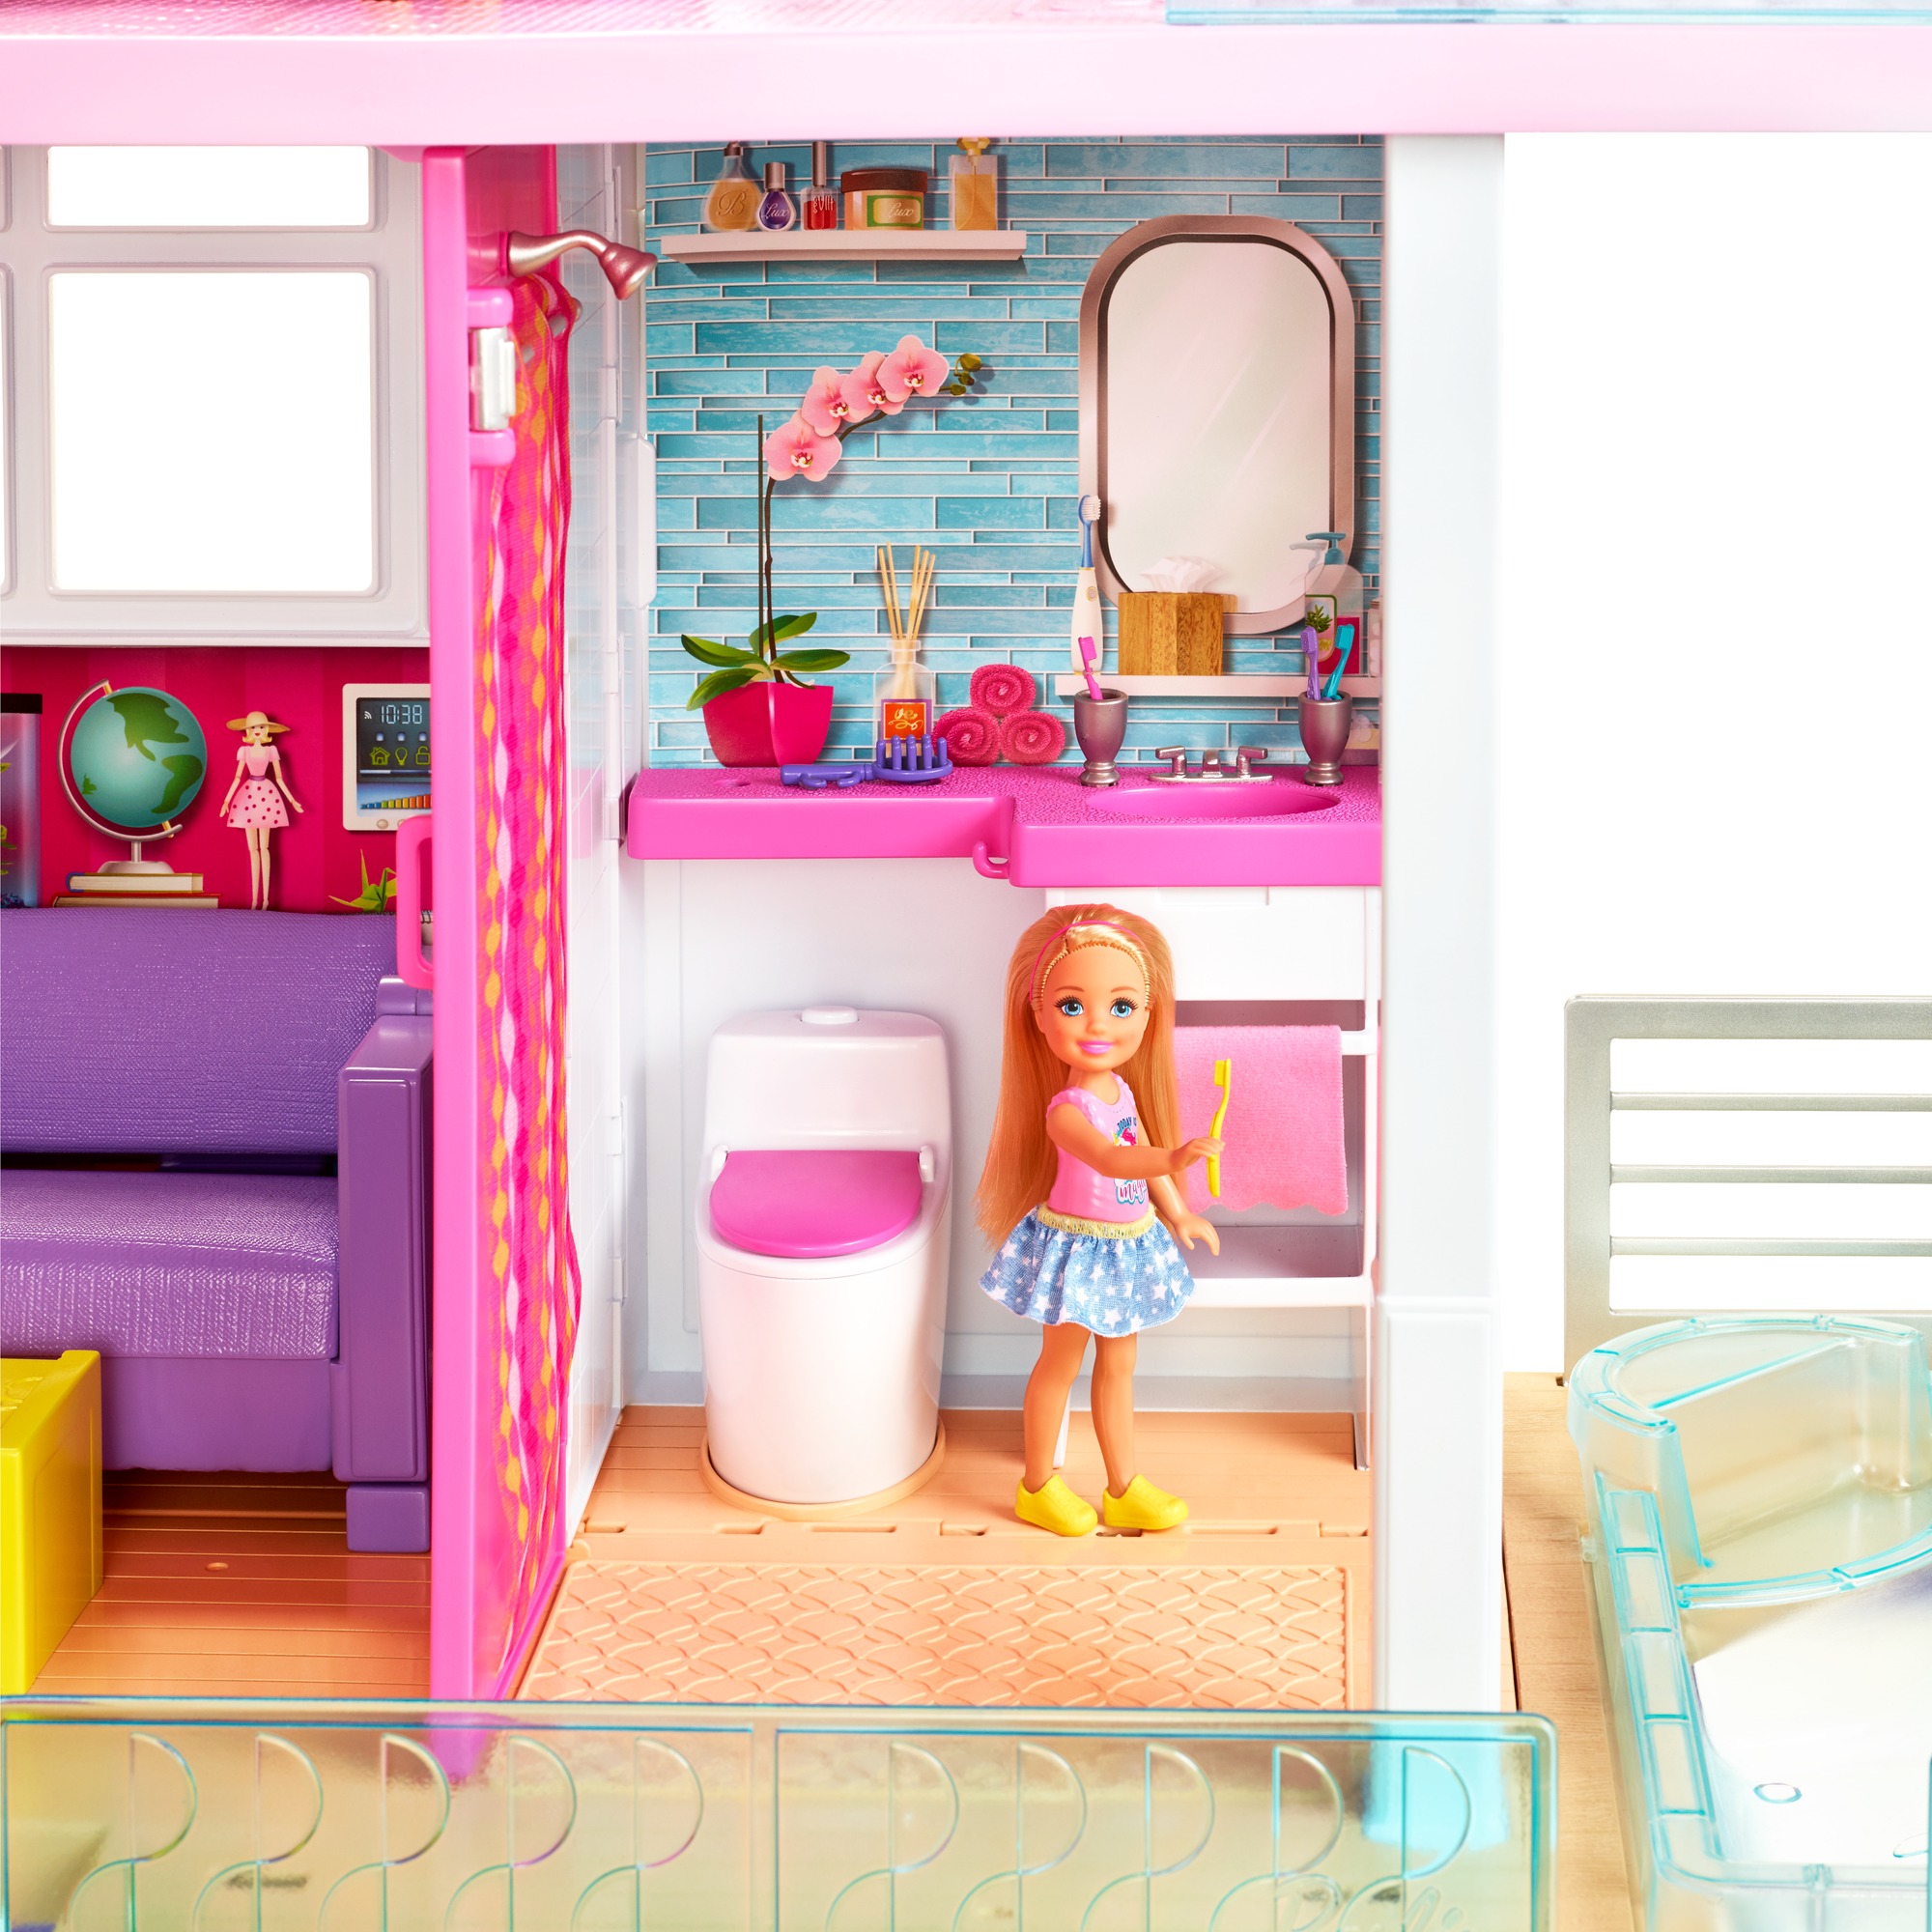 Barbie Dreamhouse 46.5 inch Dollhouse with Elevator, Pool, Slide and 70 Accessories Including Furniture and Household Items, Gift for 3 to 7 Year Olds, assembly required - image 3 of 12